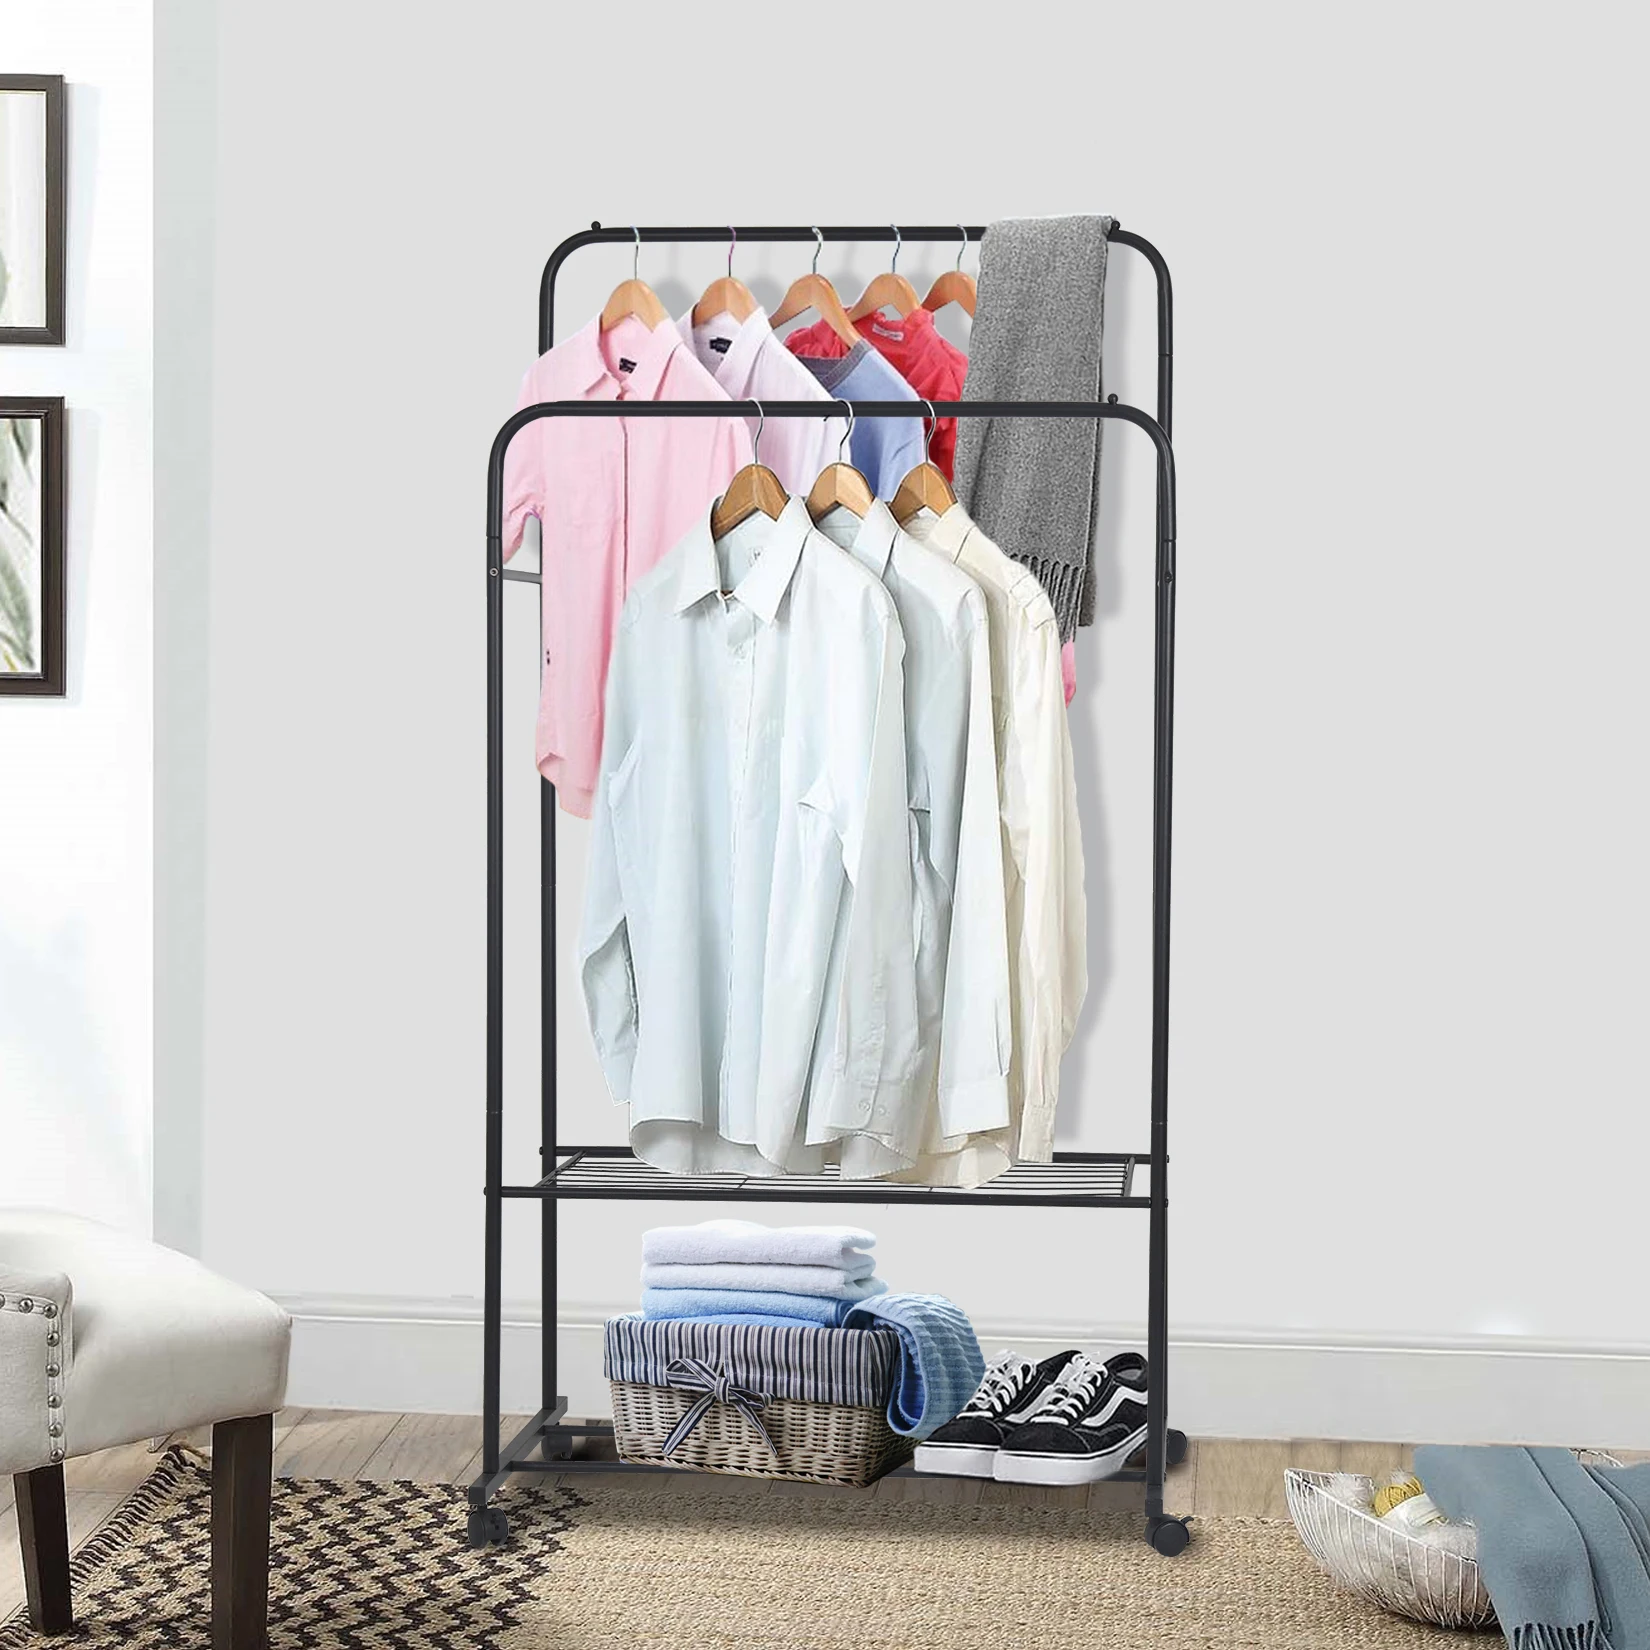 1.5m Large Clothes Rack Double Rail Rolling Stand Shoes Rack Storage Shelf White